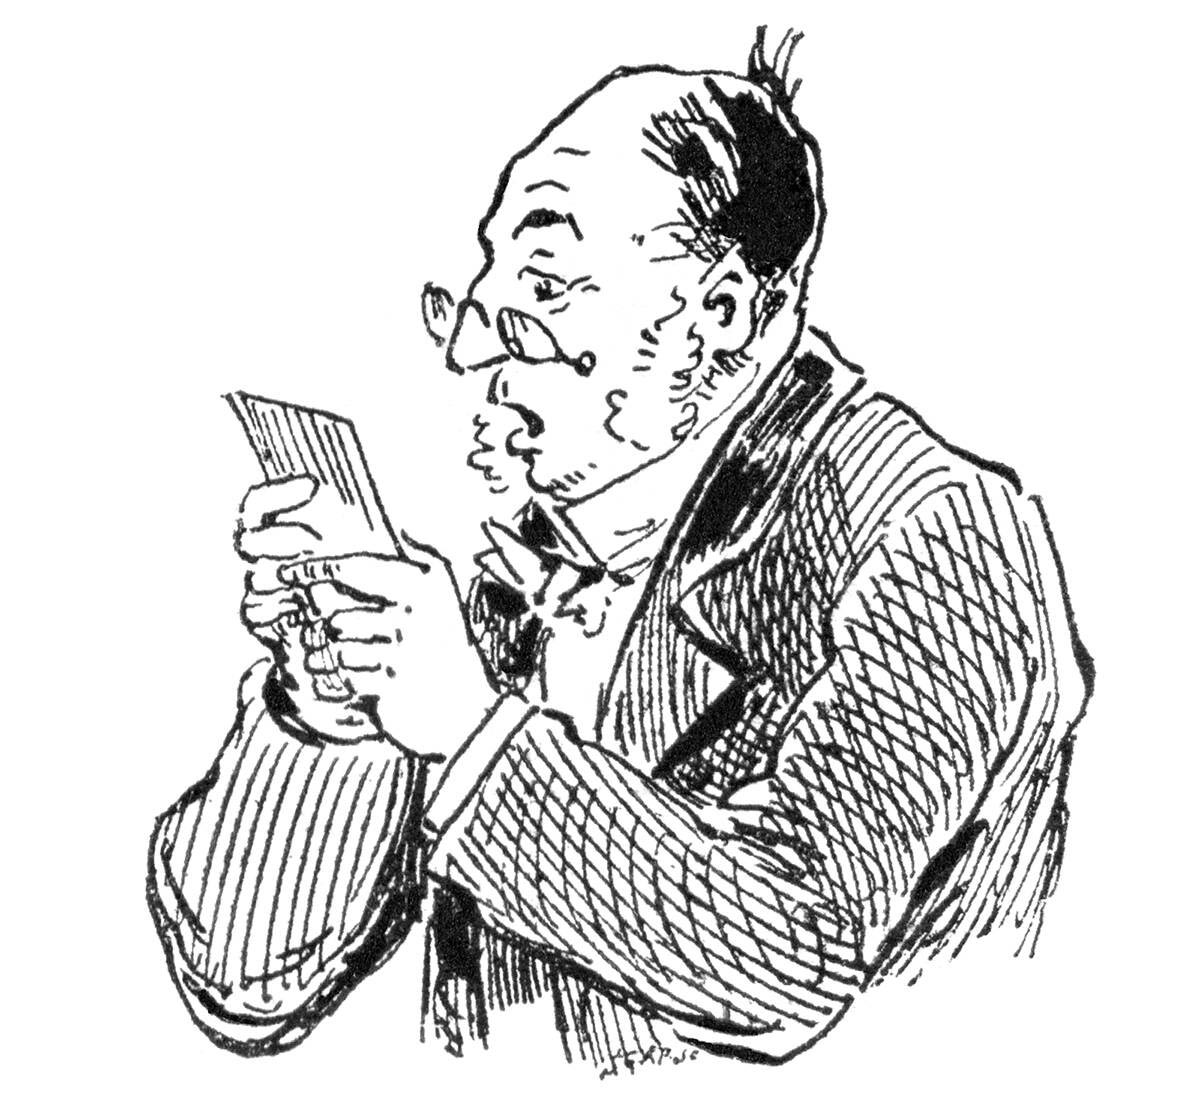 Balding man wearing sideburns and eyeglasses reading a letter with a surprised look on his face.